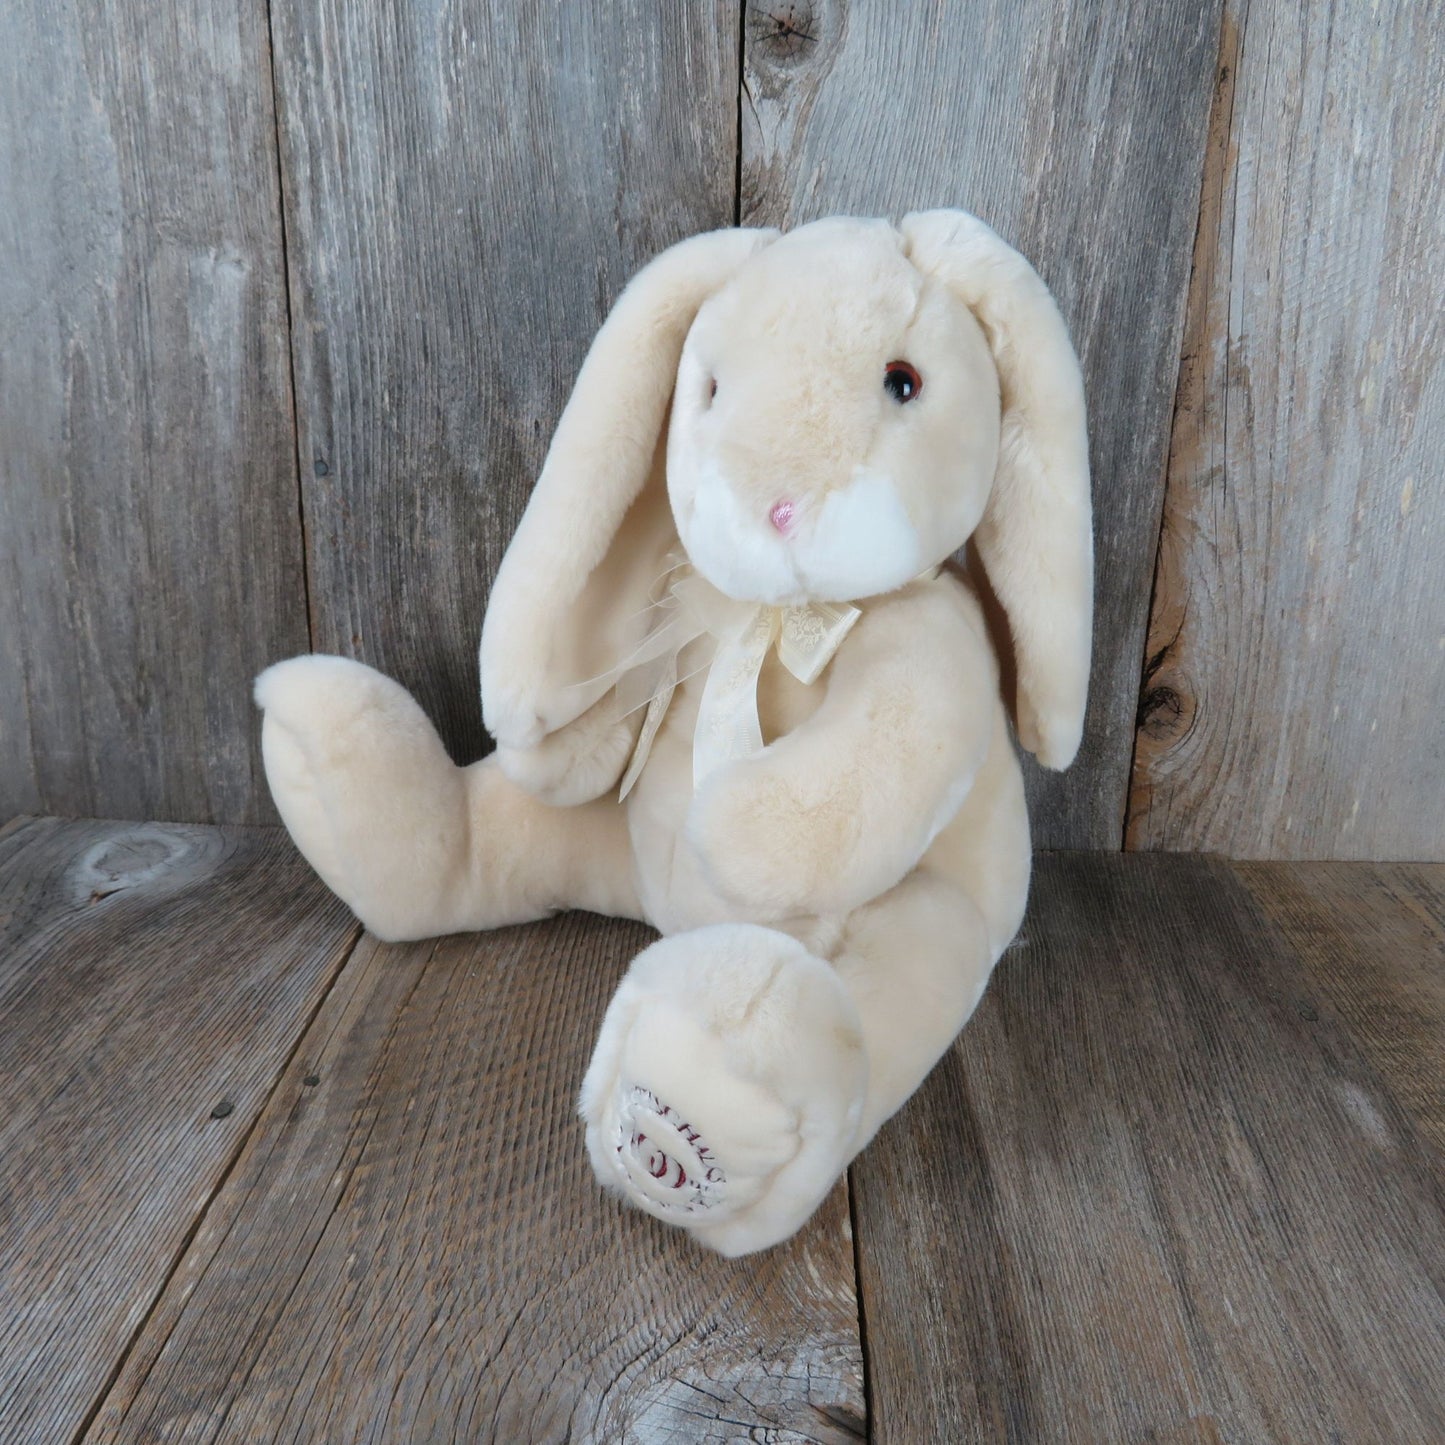 Bunny Rabbit Plush Gottchalks 100th Anniversary Bow Commonwealth Easter Tan Stitched Nose 2003